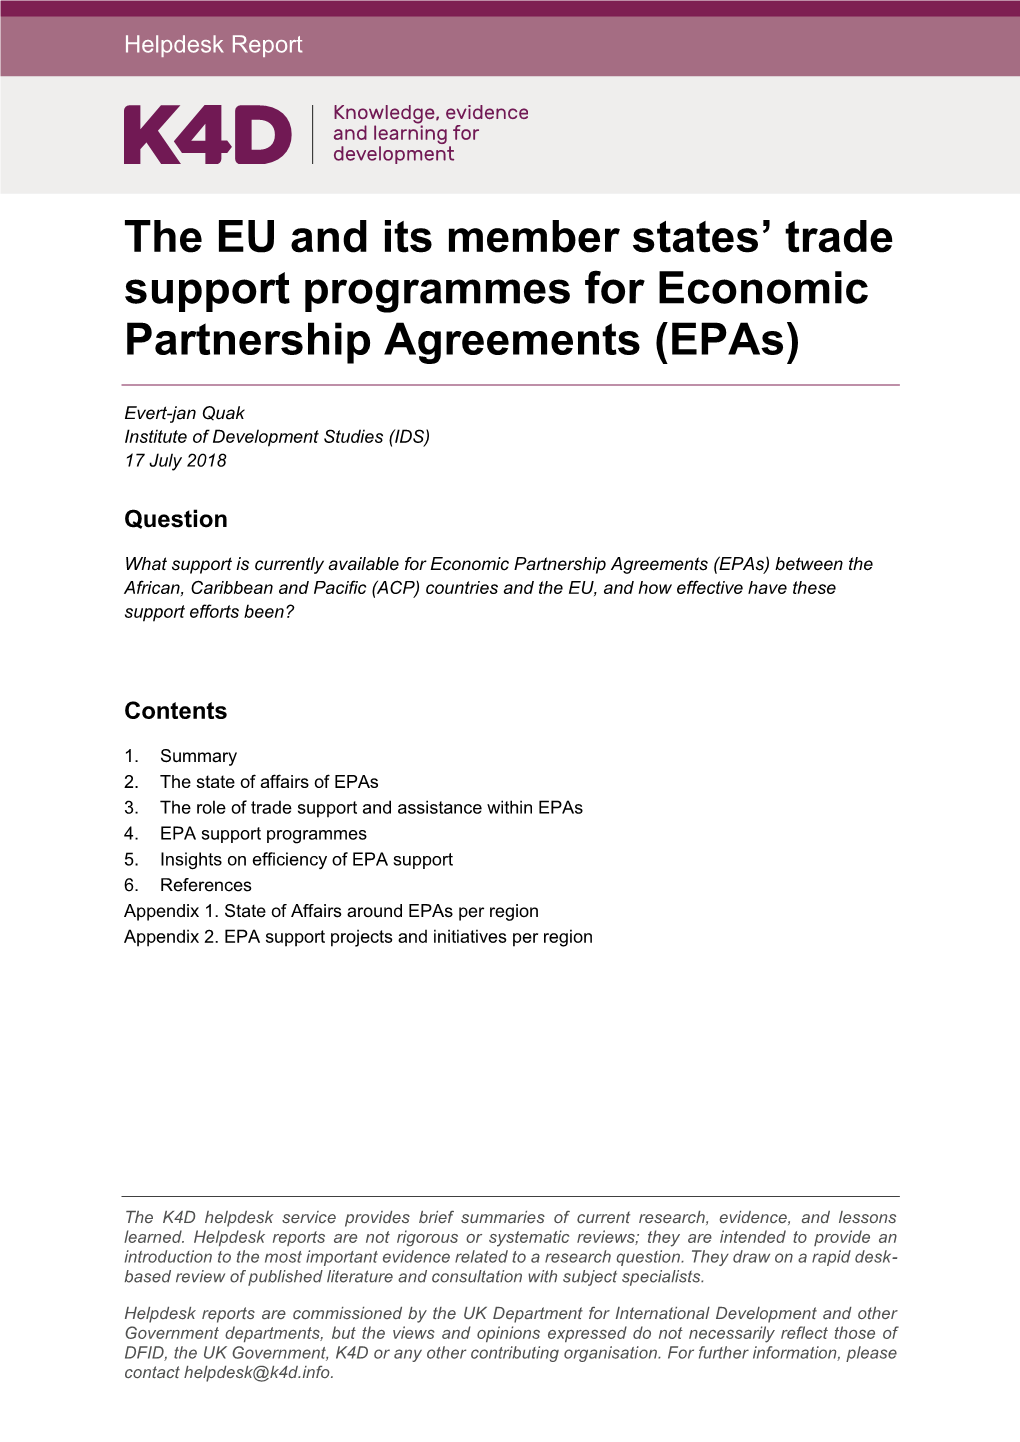 The EU and Its Member States' Trade Support Programmes for Economic